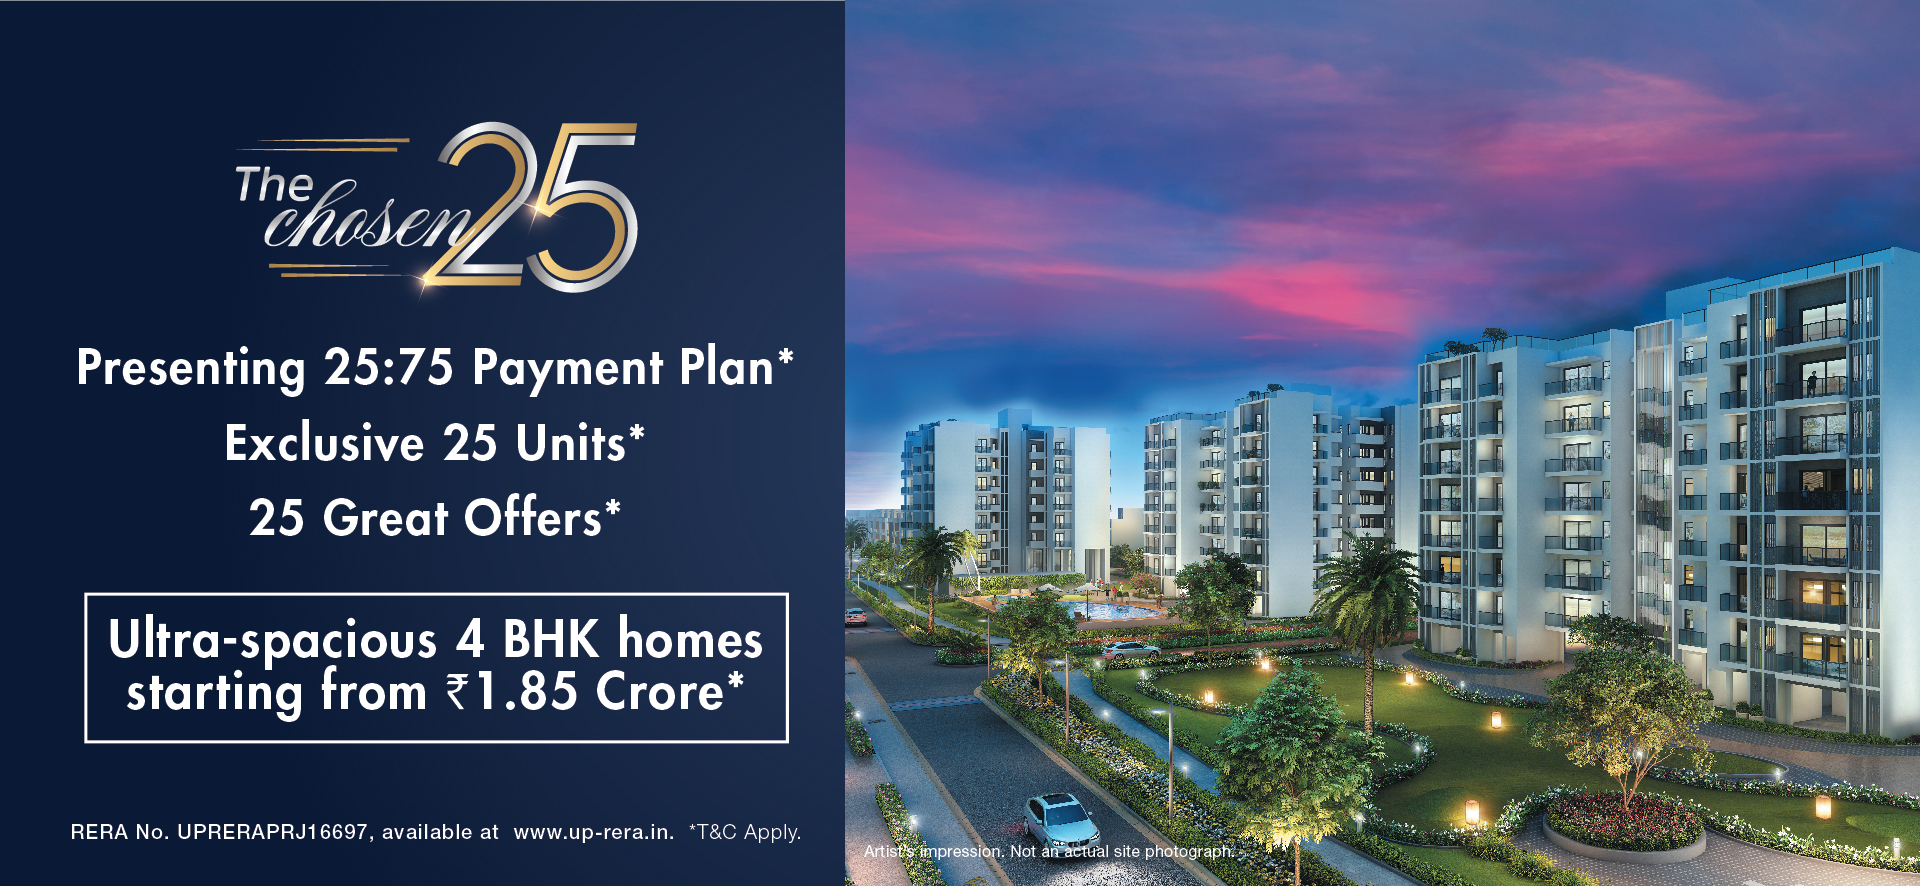 Presenting 25:75 Payment Plan at Godrej Golf Links in Greater Noida Update